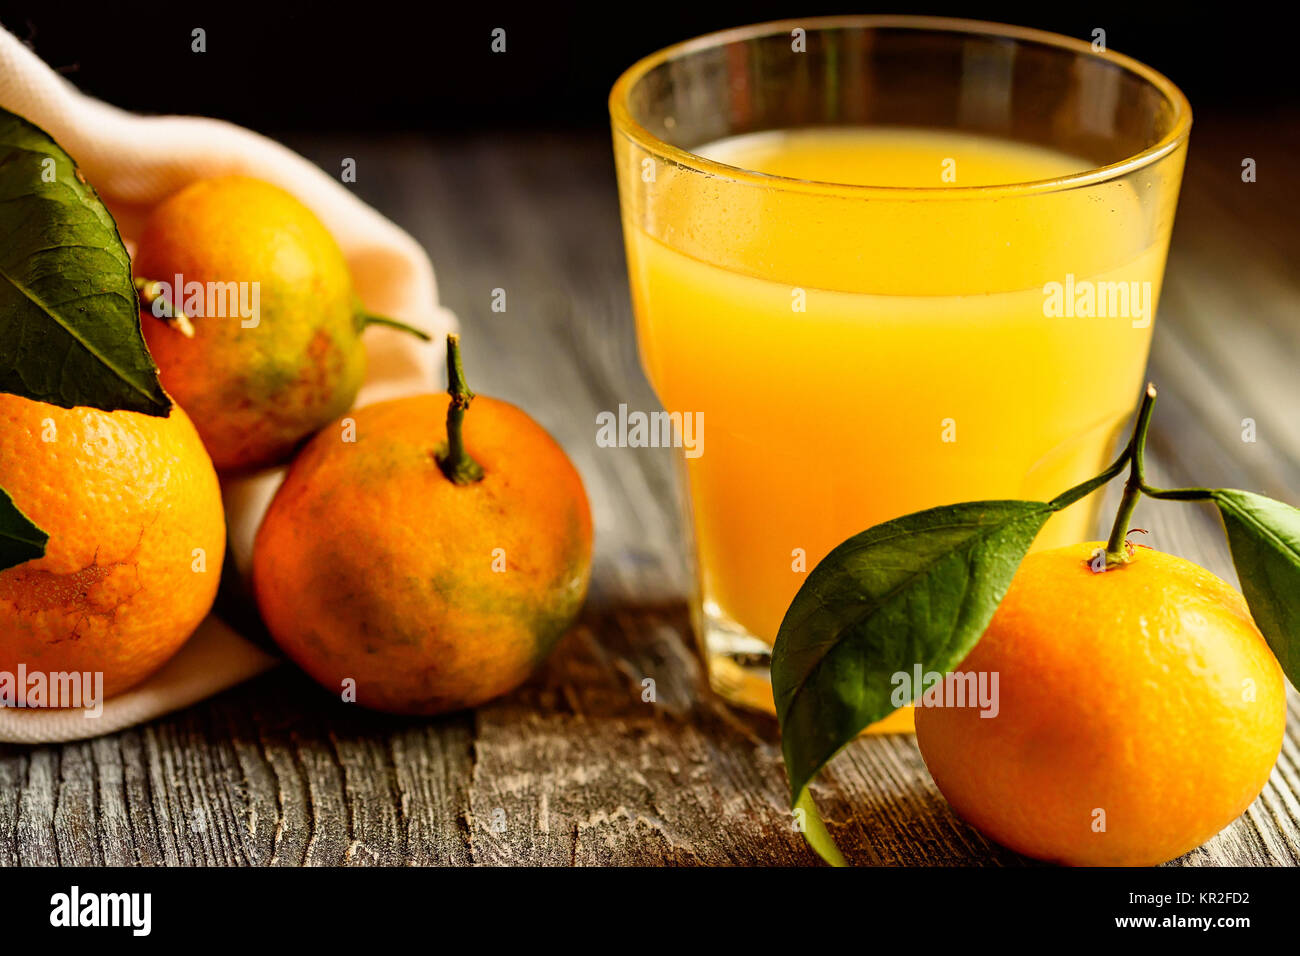 Glass of fresh juice and mandarins on table Stock Photo